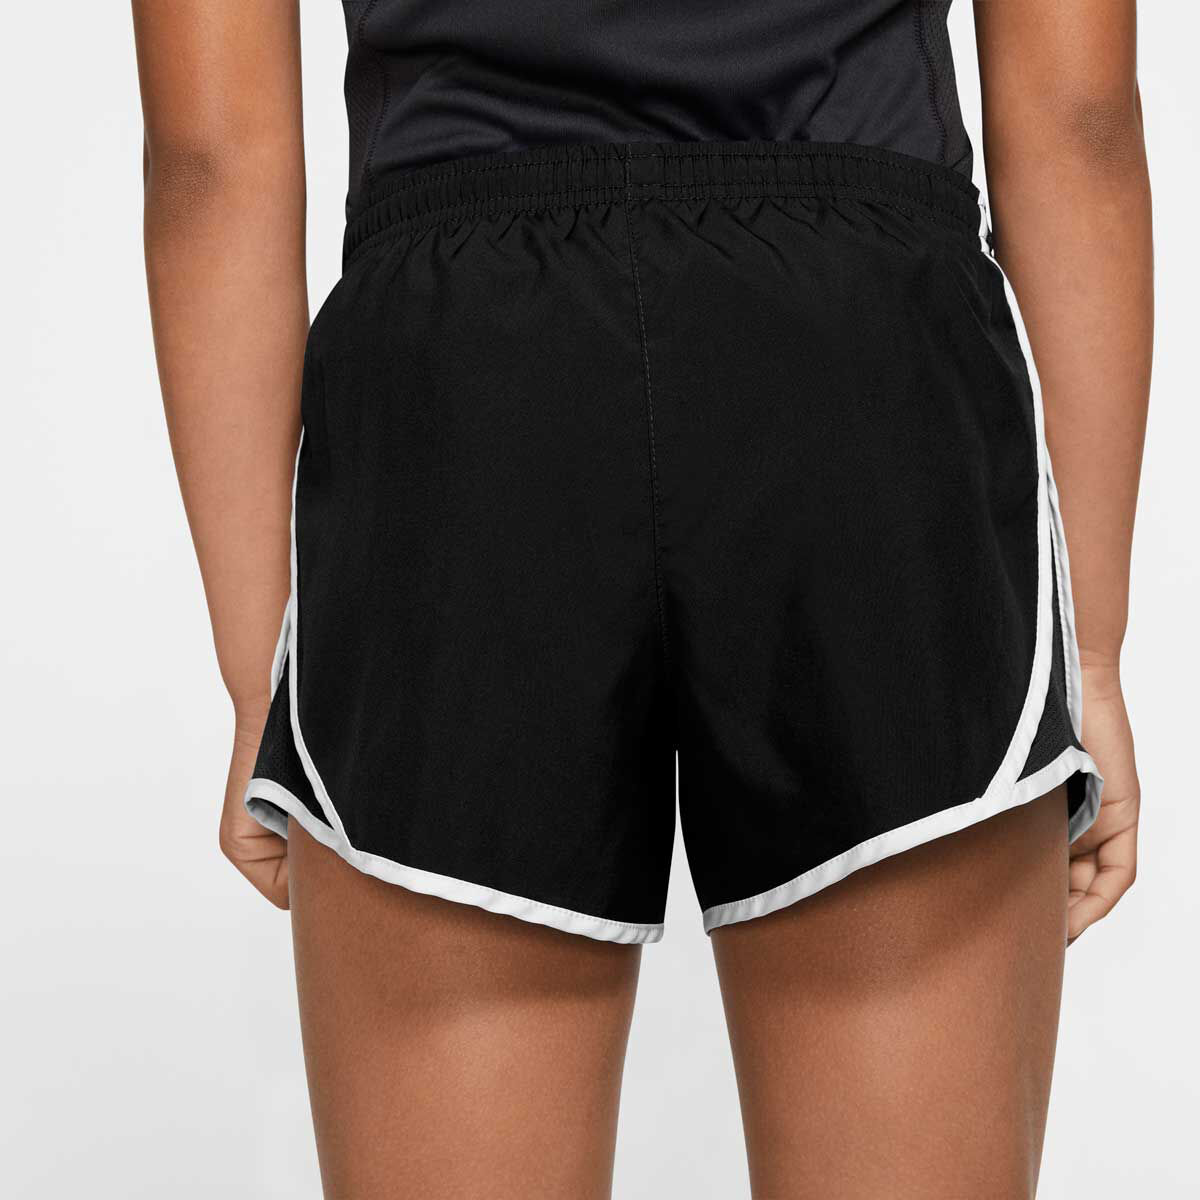 Nike Running Race Day Tempo Dri-FIT shorts in blue